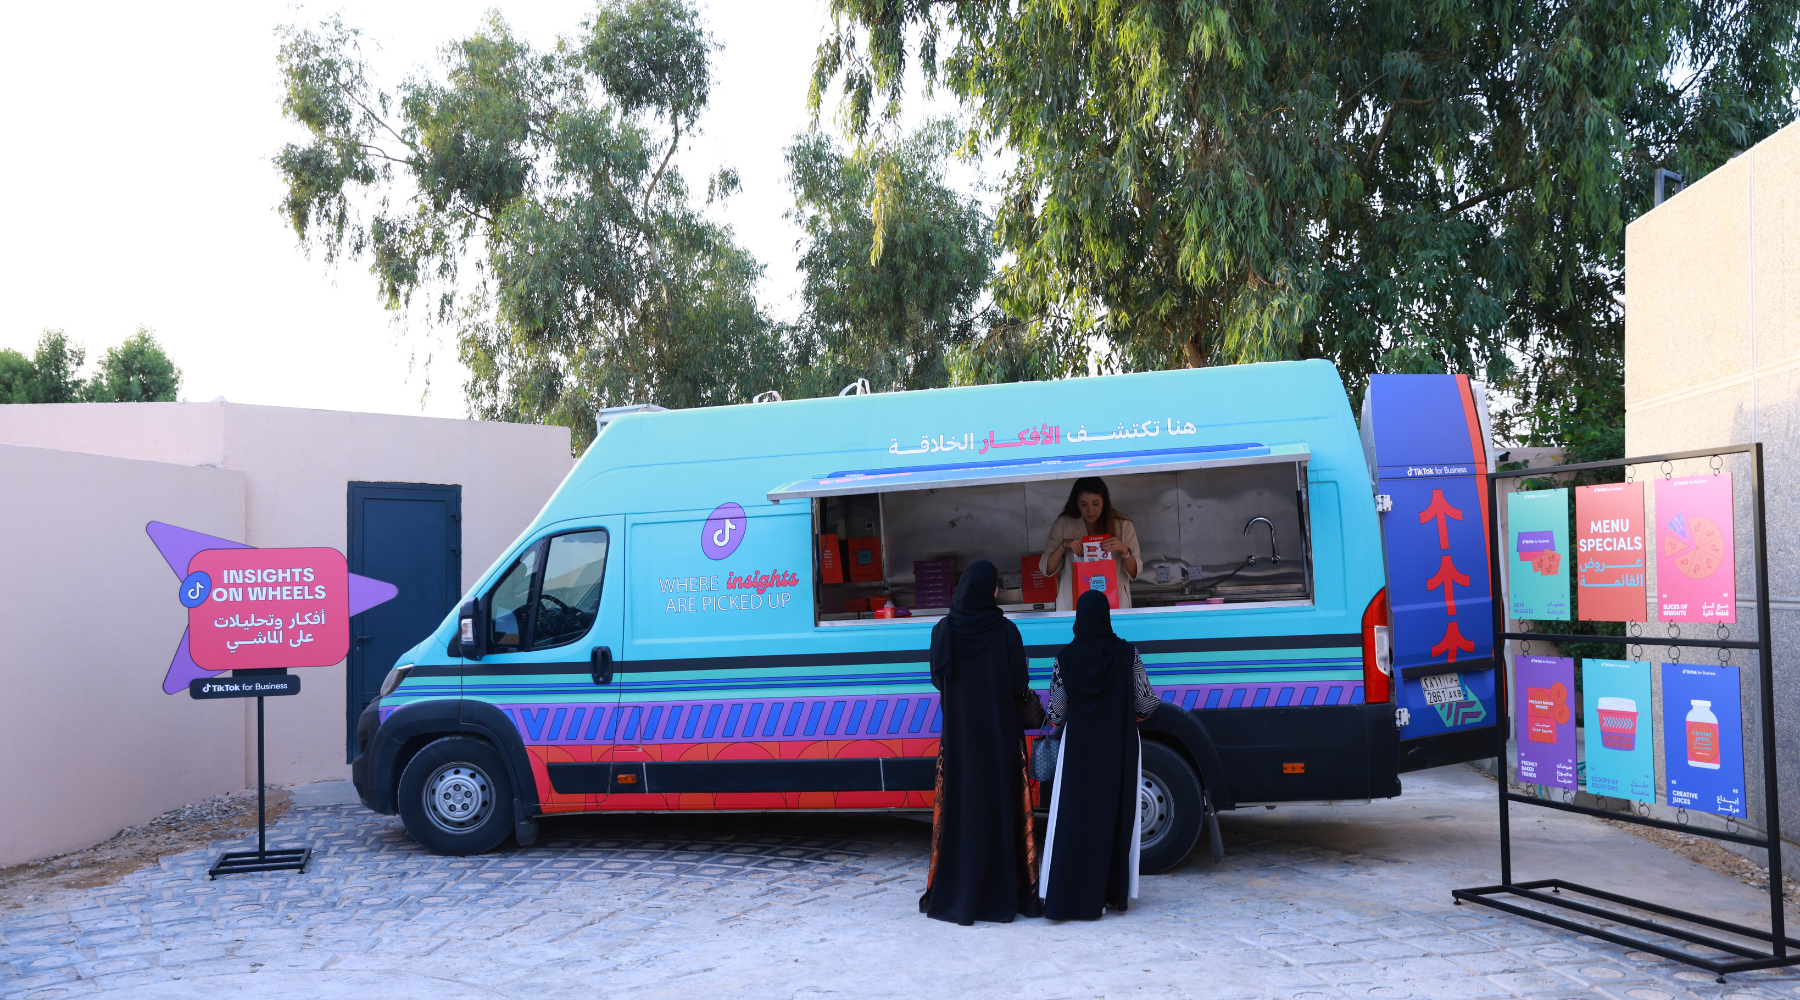 TikTok Hosts 'Insights on Wheels' Event to Discuss Marketing for KSA's Food Services Sector